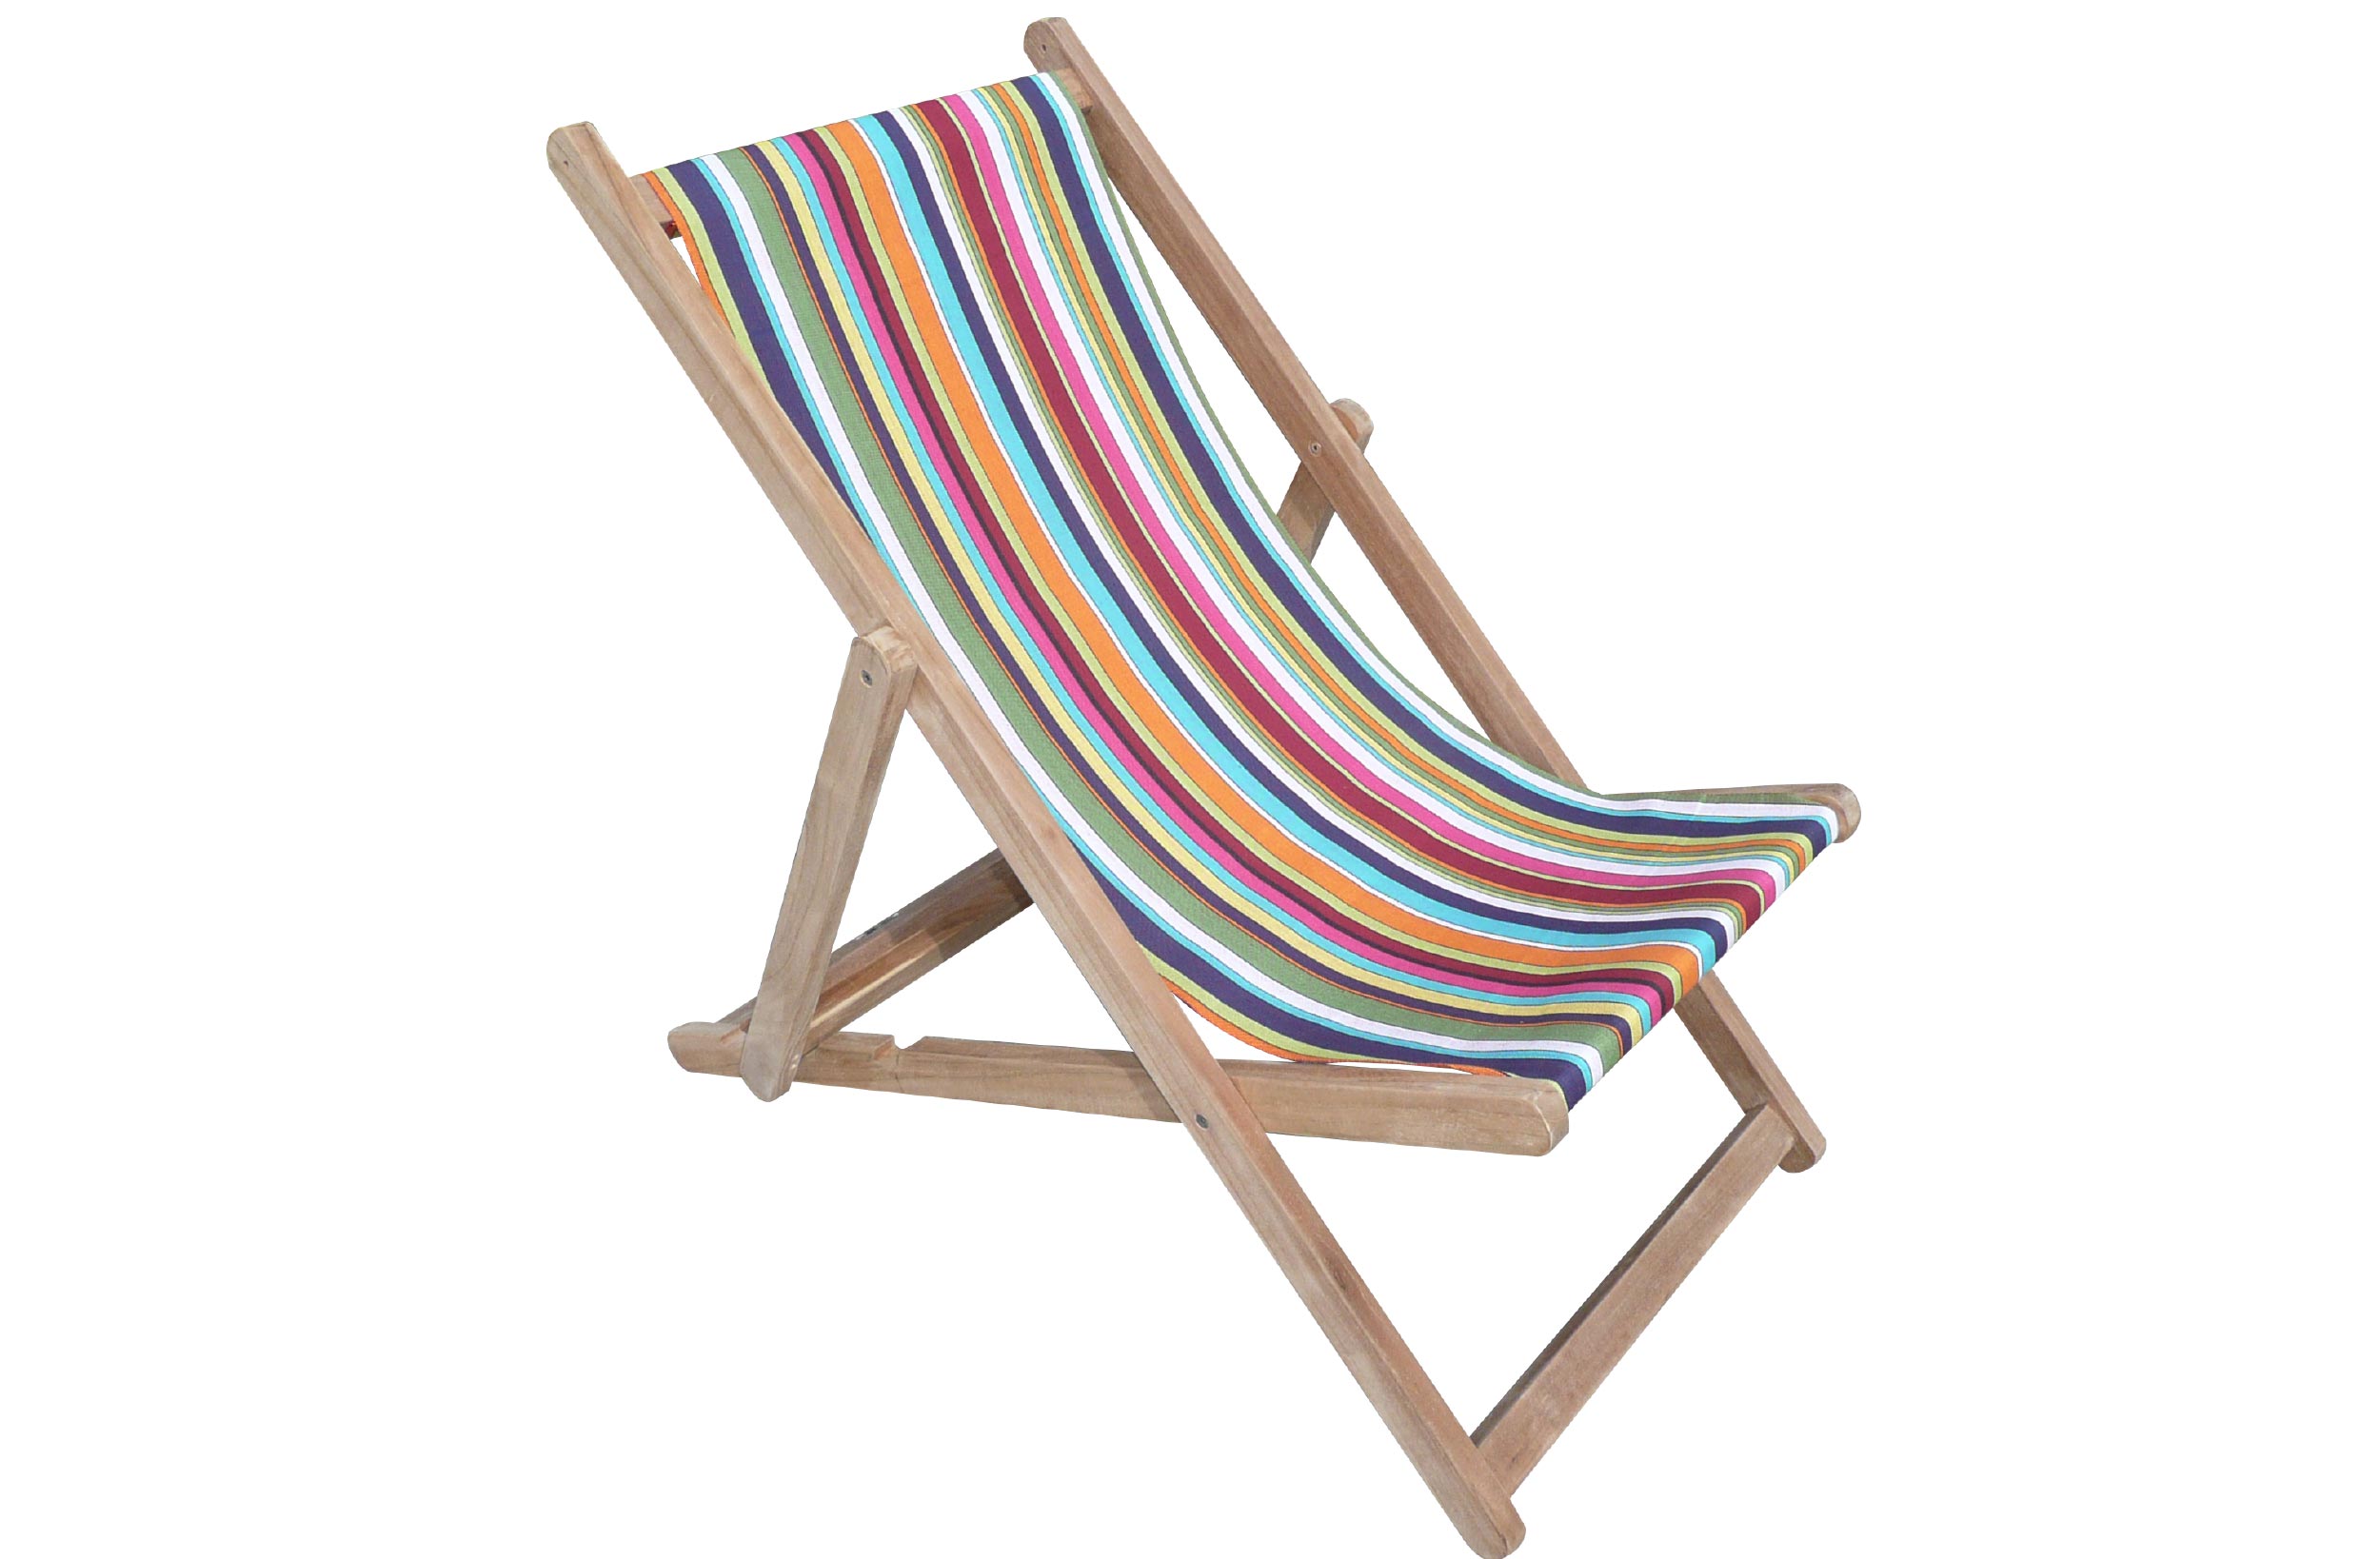 Rainbow Striped Deckchairs | Wooden Folding Deck Chairs Paintballing Stripes